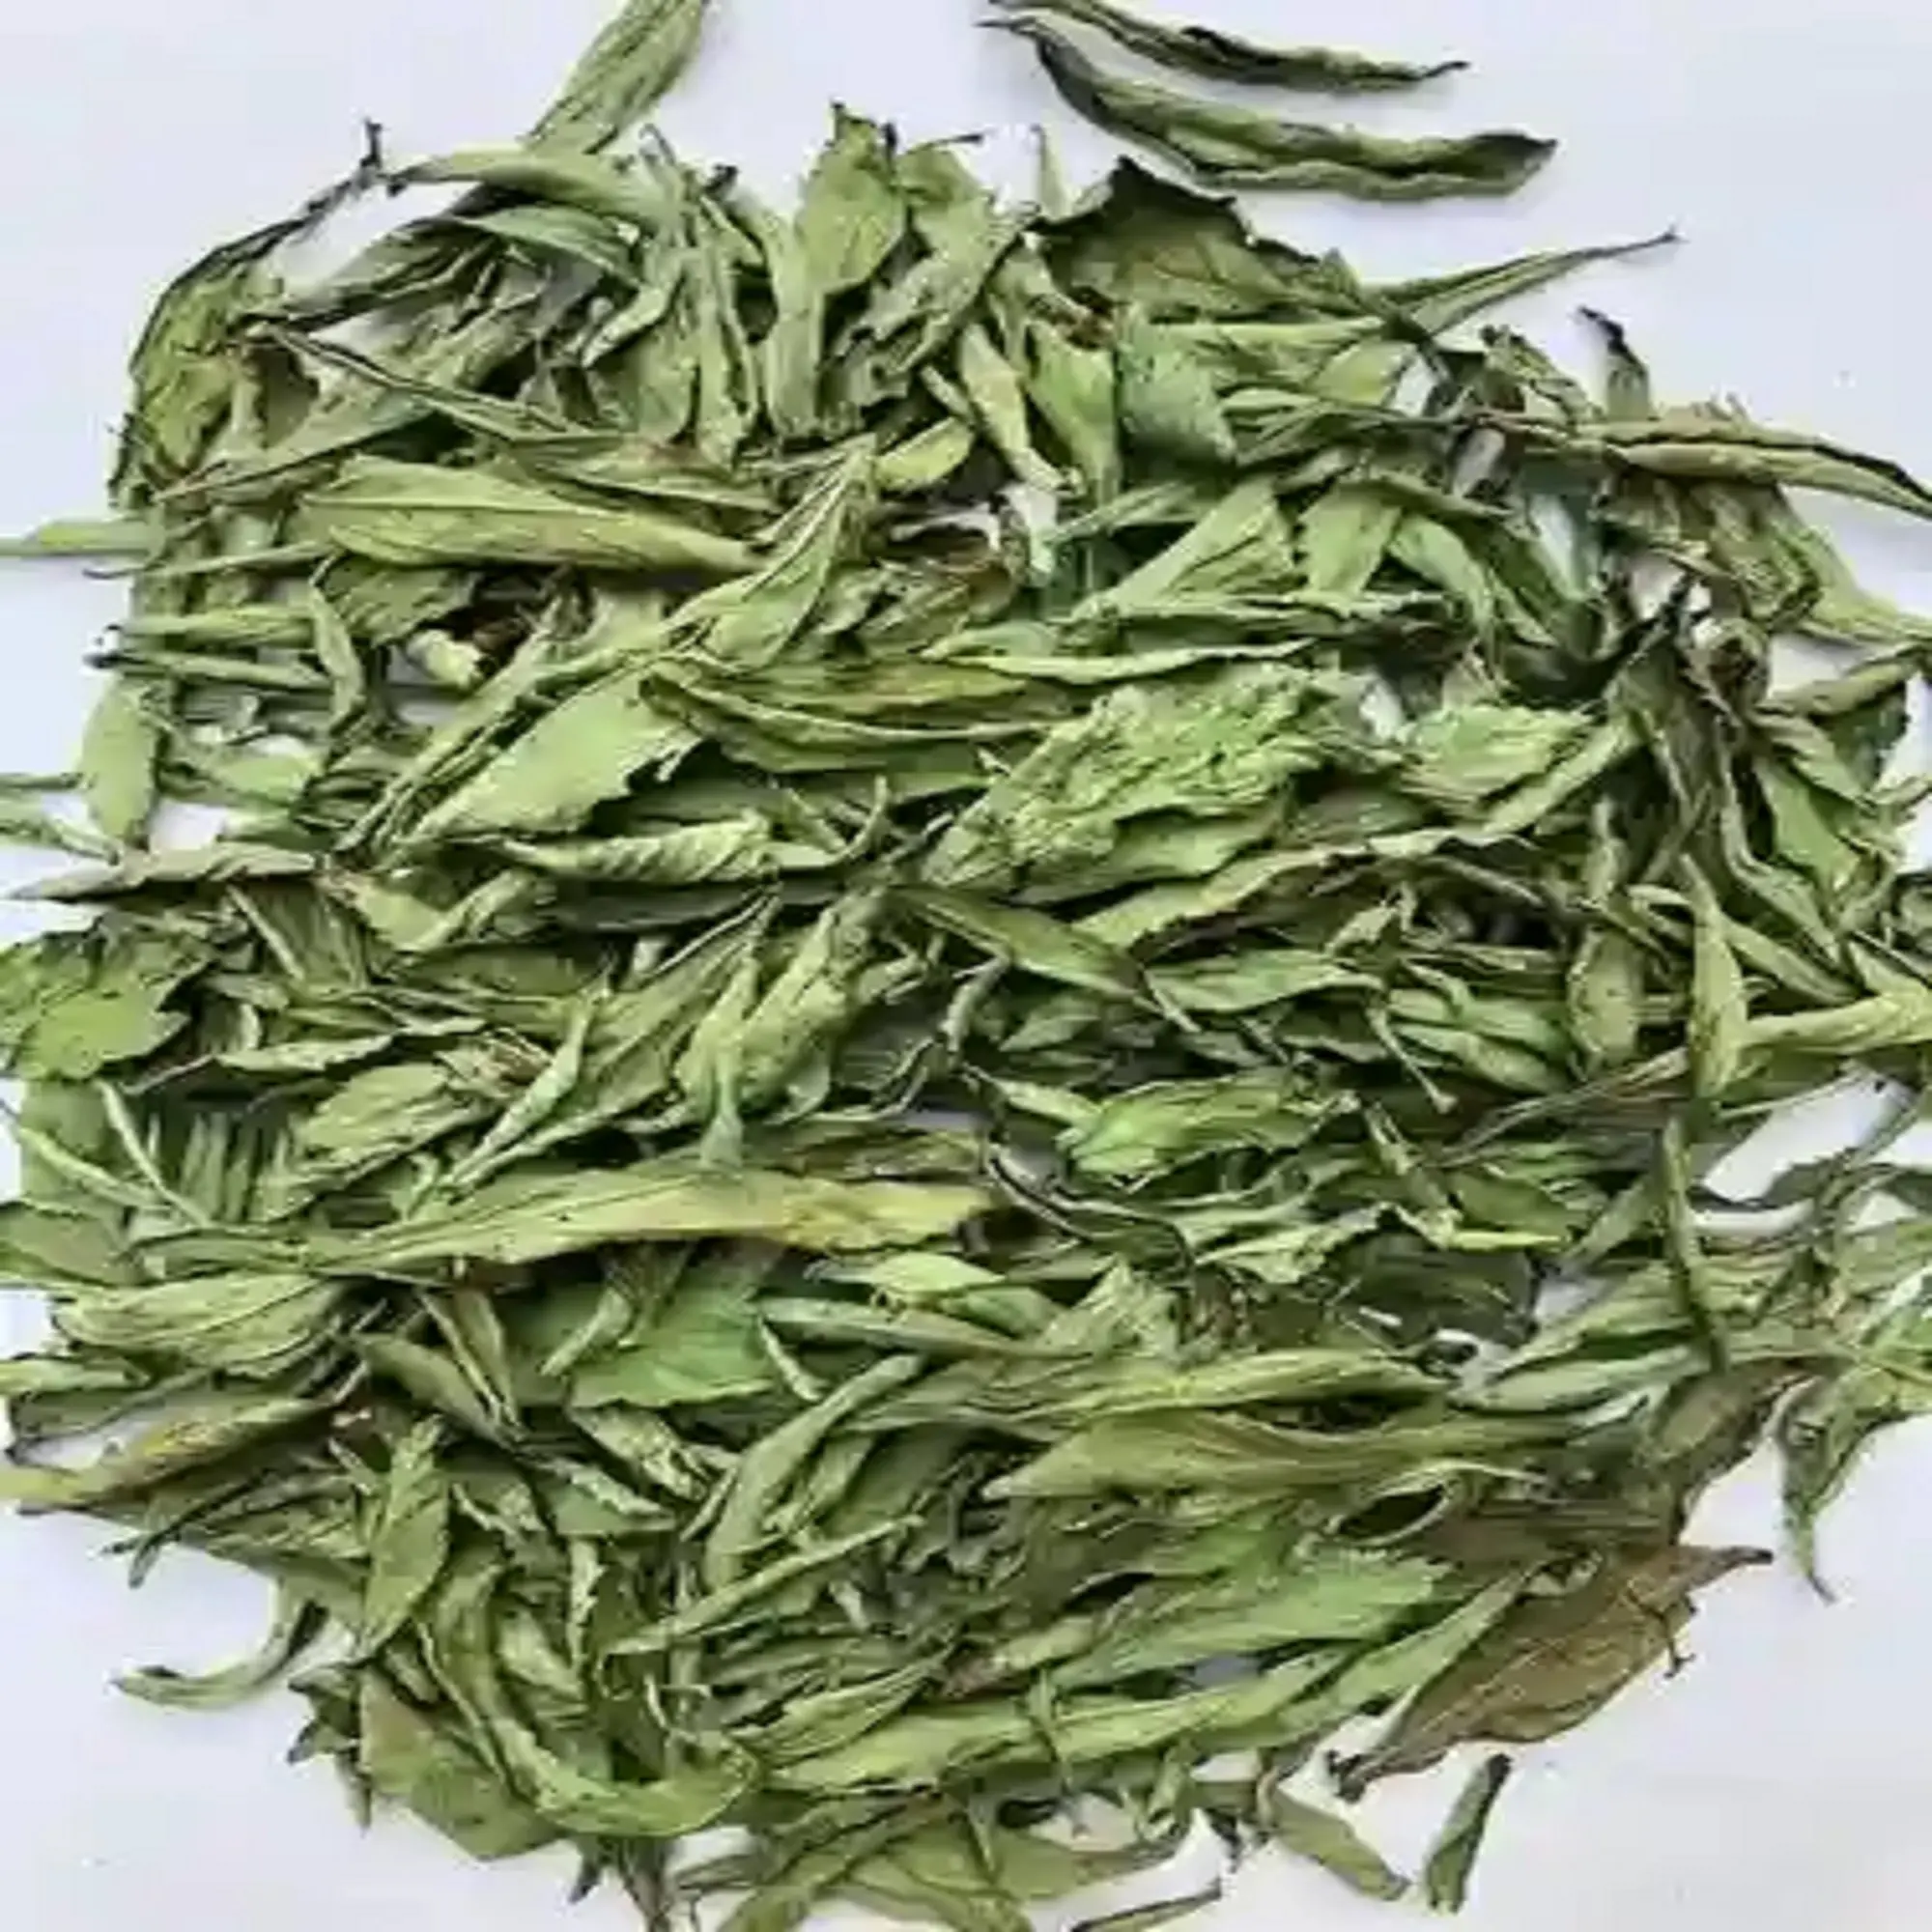 High Quantity Wholesale Herbal Tea Dried Stevia Rebaudiana Leaf Chinese Herb For Sale By Indian Exporter With Private Labelling